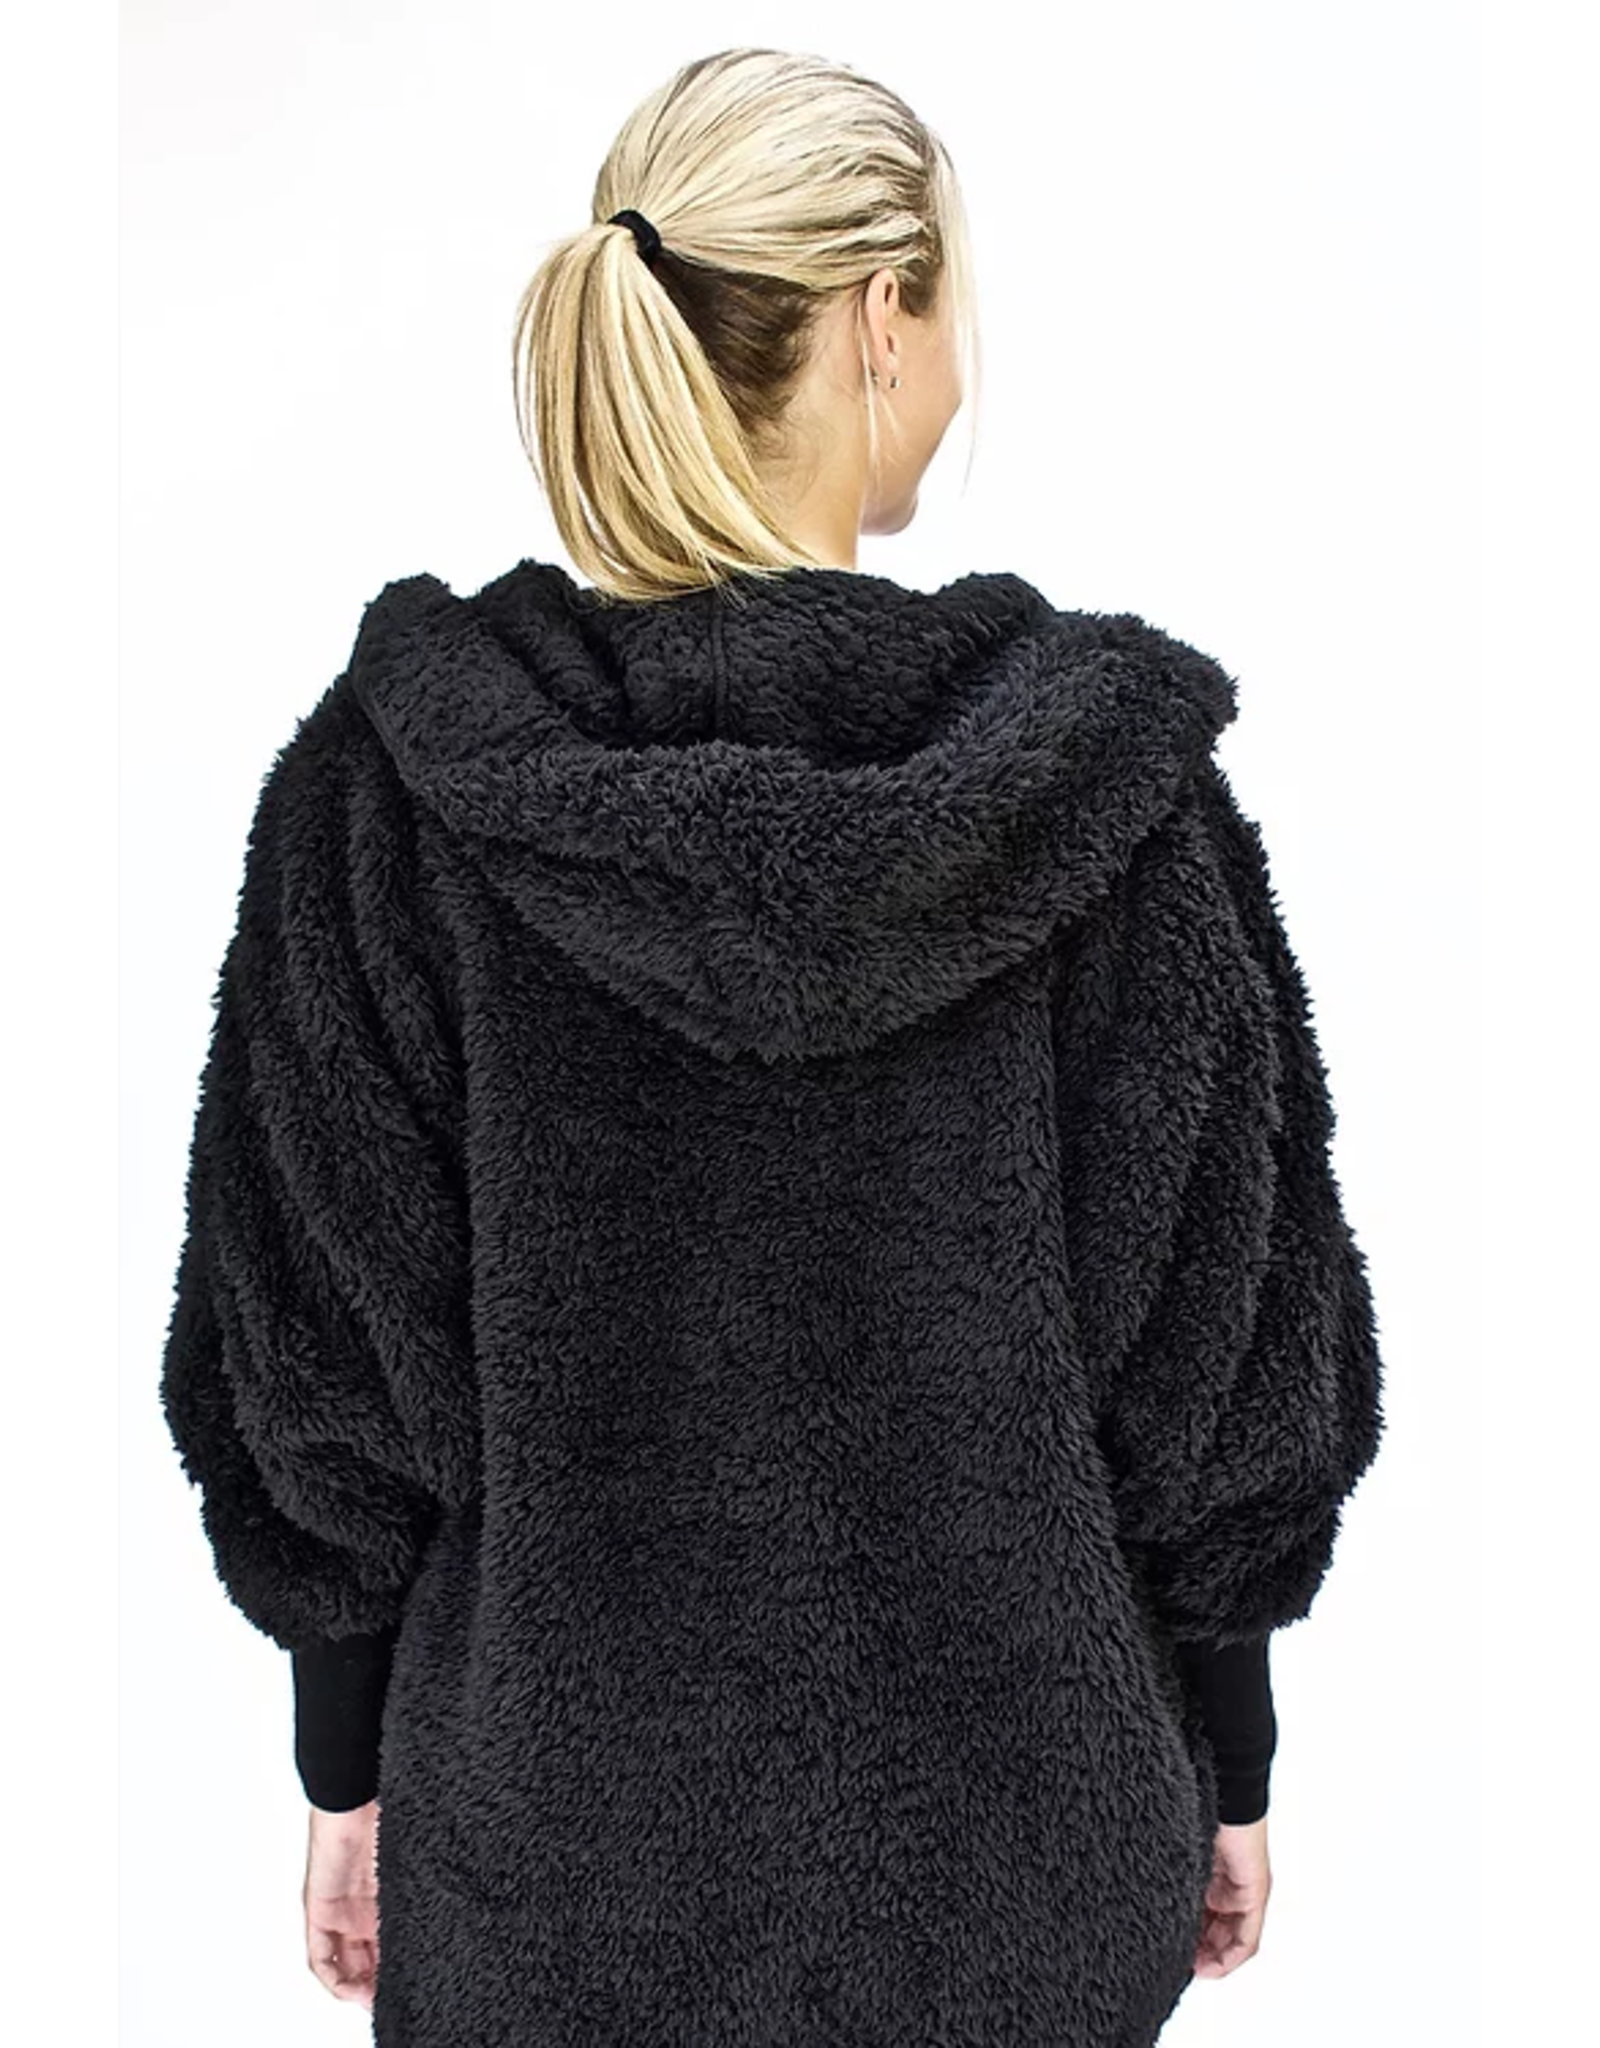 Nordic Beach Nordic Beach NB-BL Cozy Hooded Wrap One Size  Black Licorice